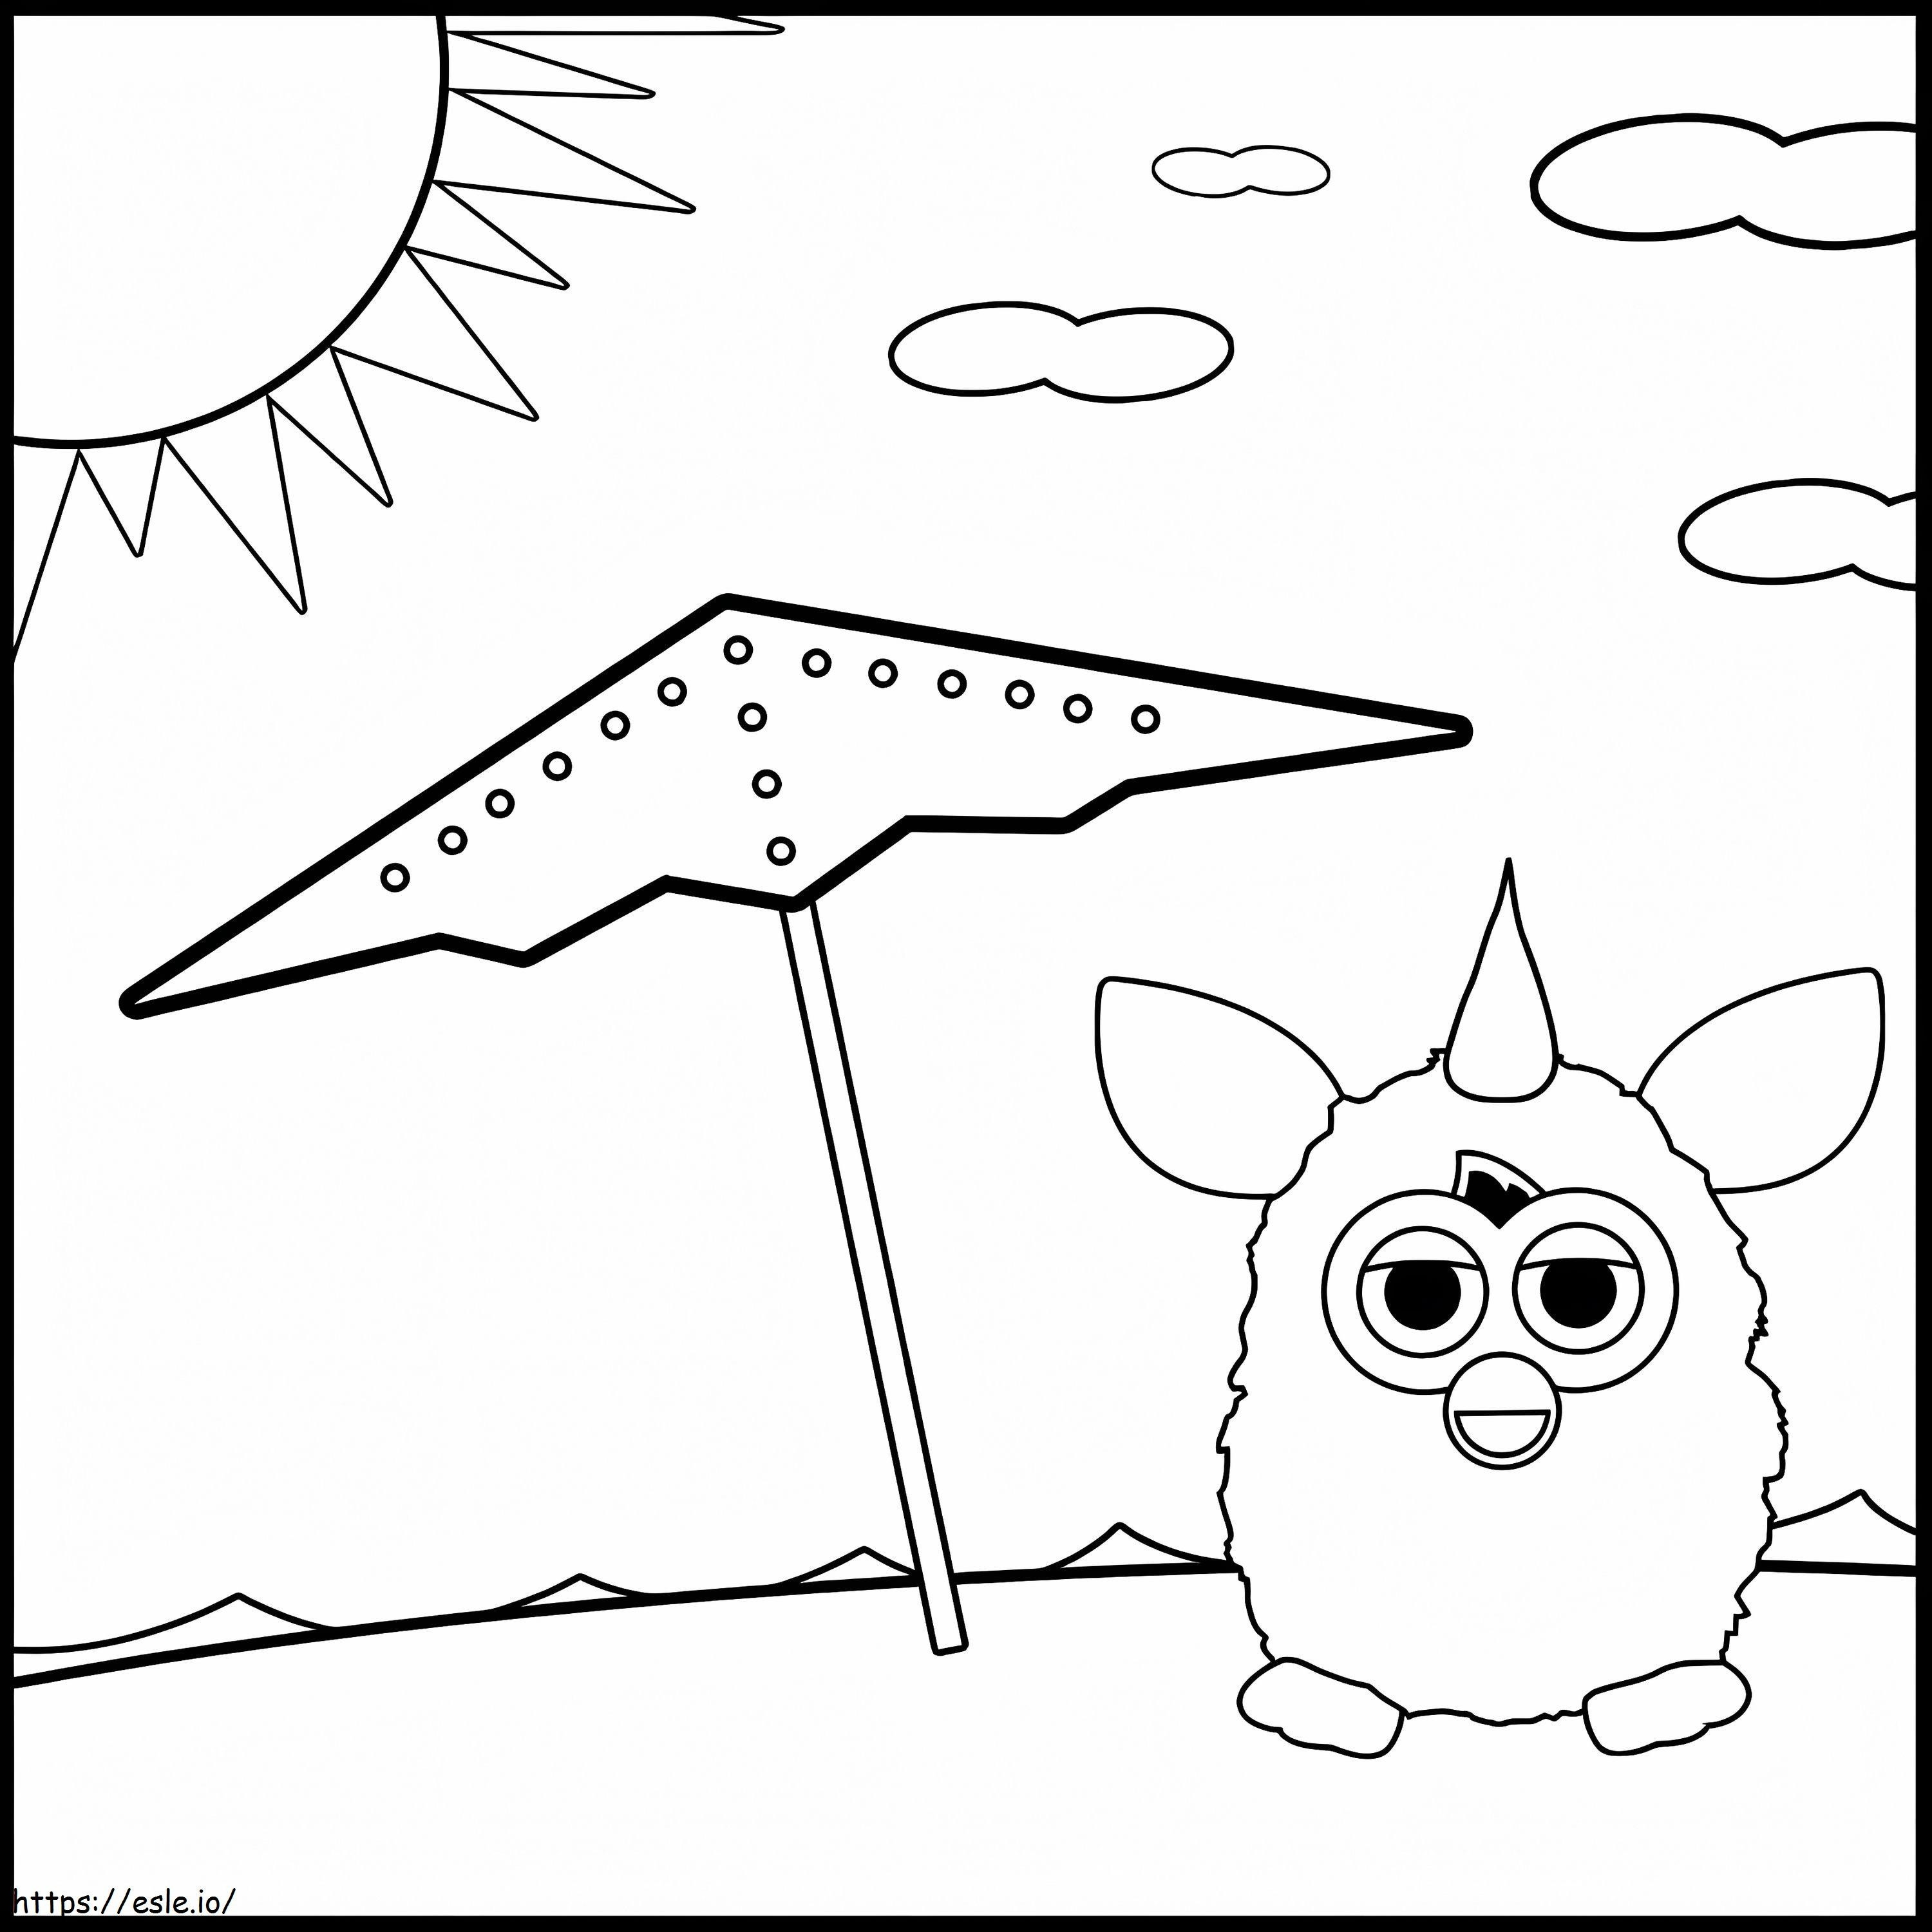 Furby Sunbathes coloring page